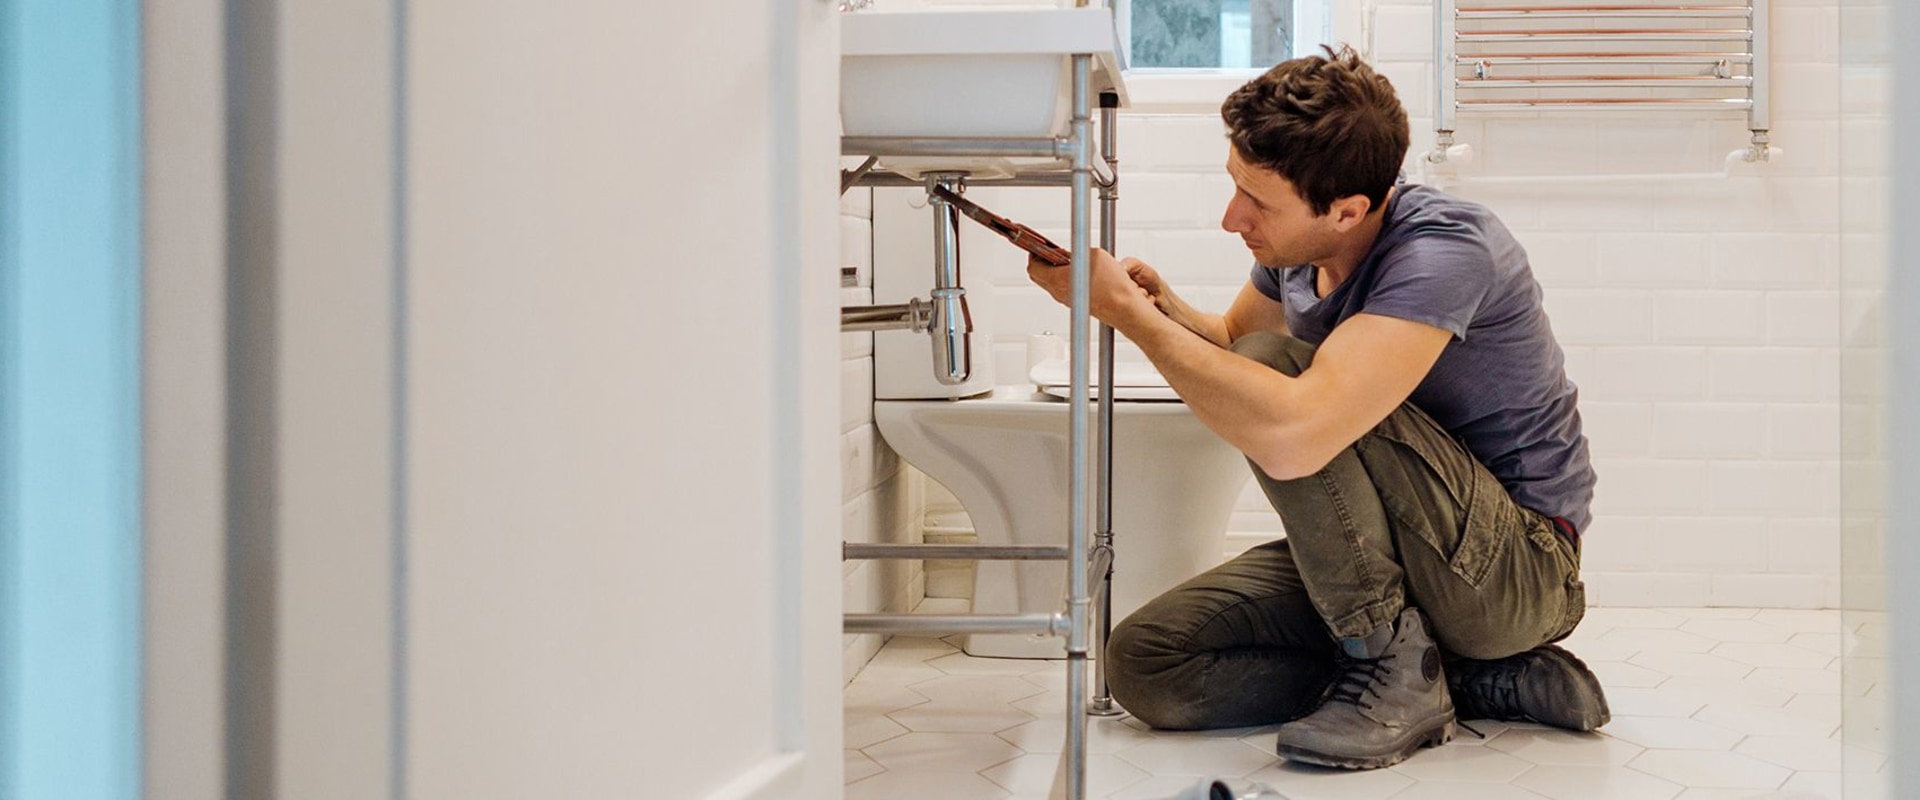 Replacing Outdated Fixtures - Tips and Advice for Home Maintenance and Repairs